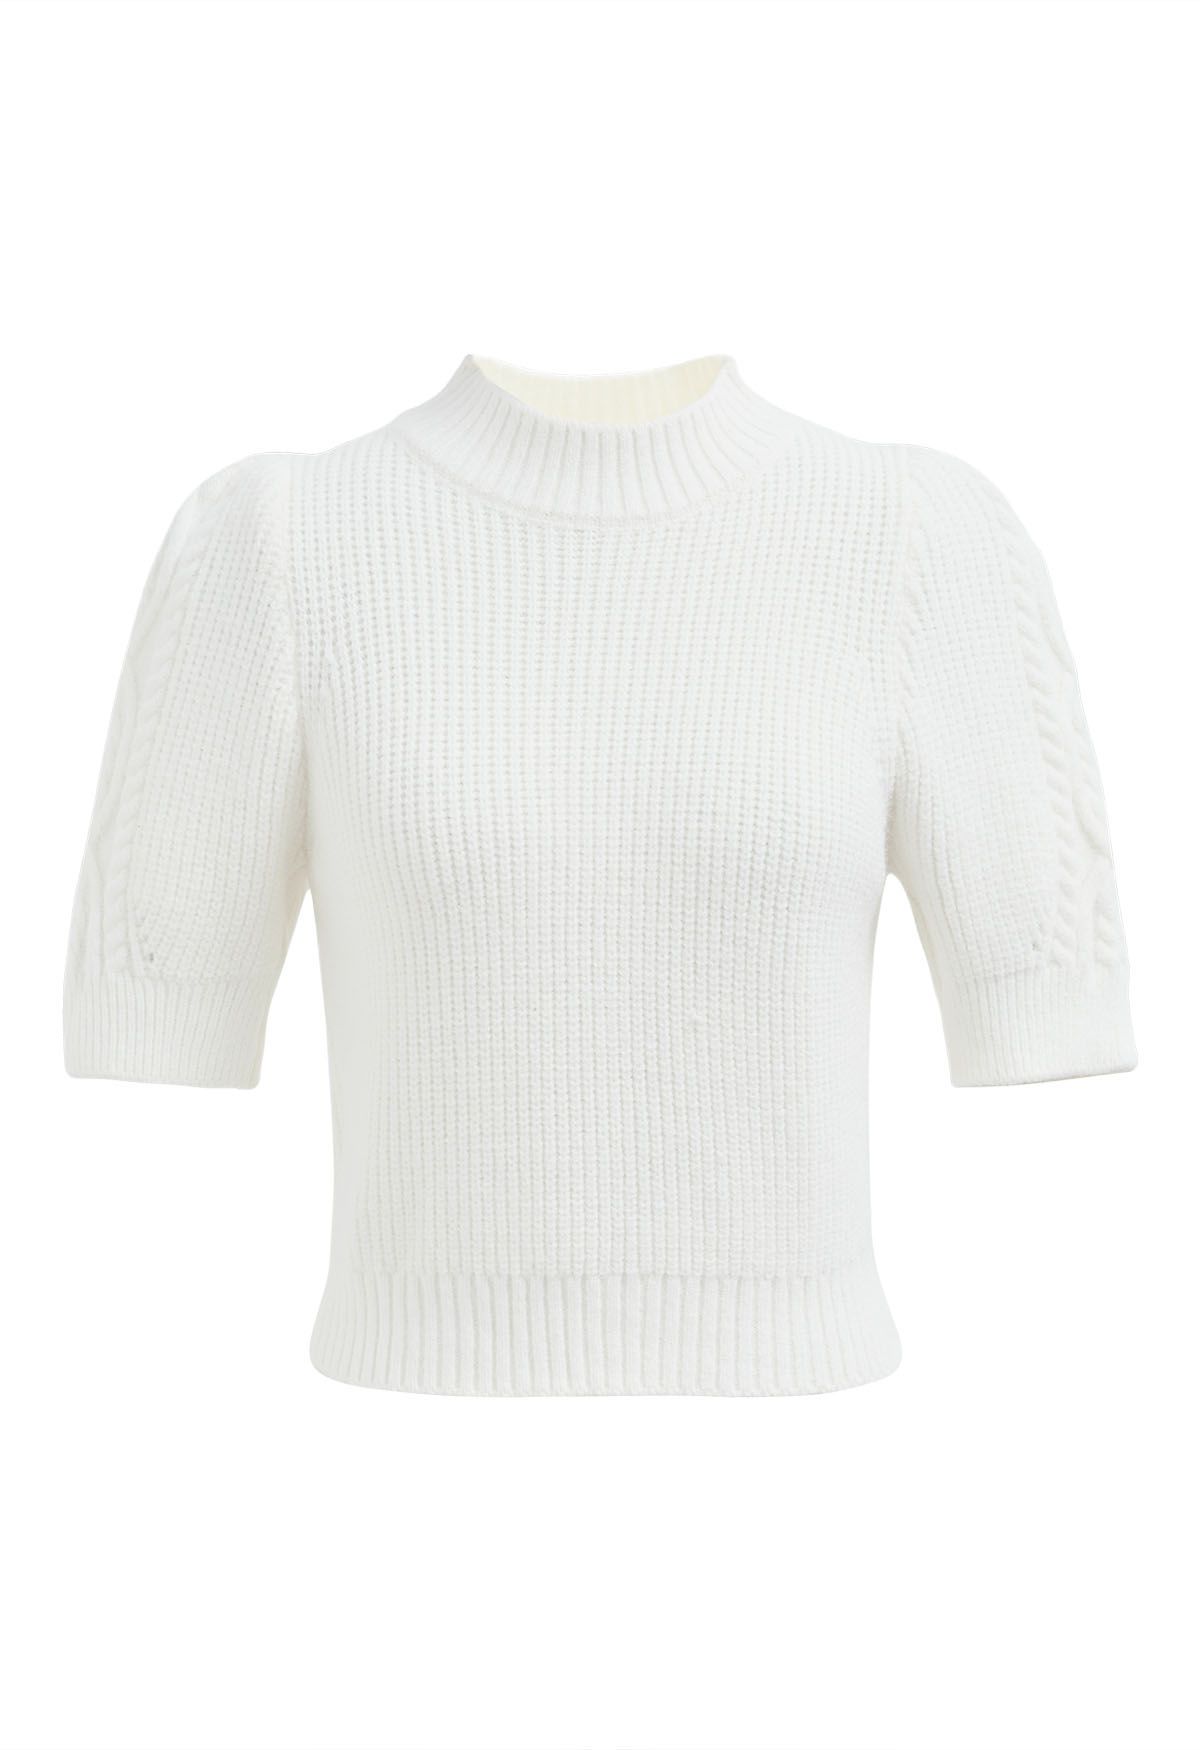 Mock Neck Short Sleeve Knit Sweater in White - Retro, Indie and Unique ...